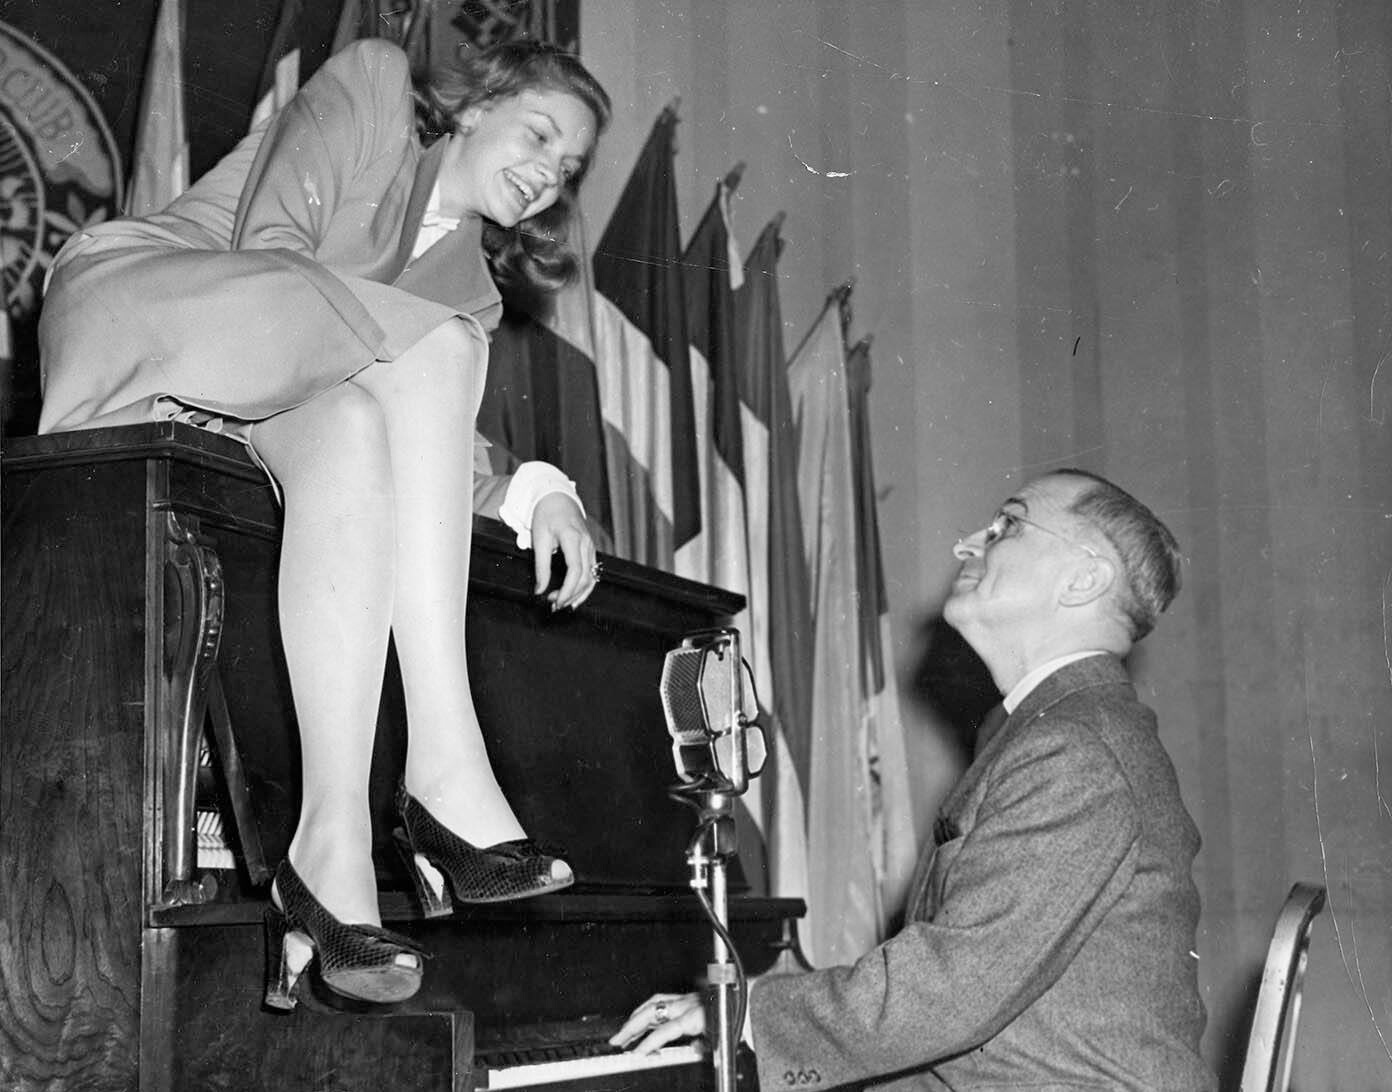 Harry Truman was just three weeks into his vice presidency when he was photographed playing the piano, looking up at Lauren Bacall whose shapely legs hang over the front.